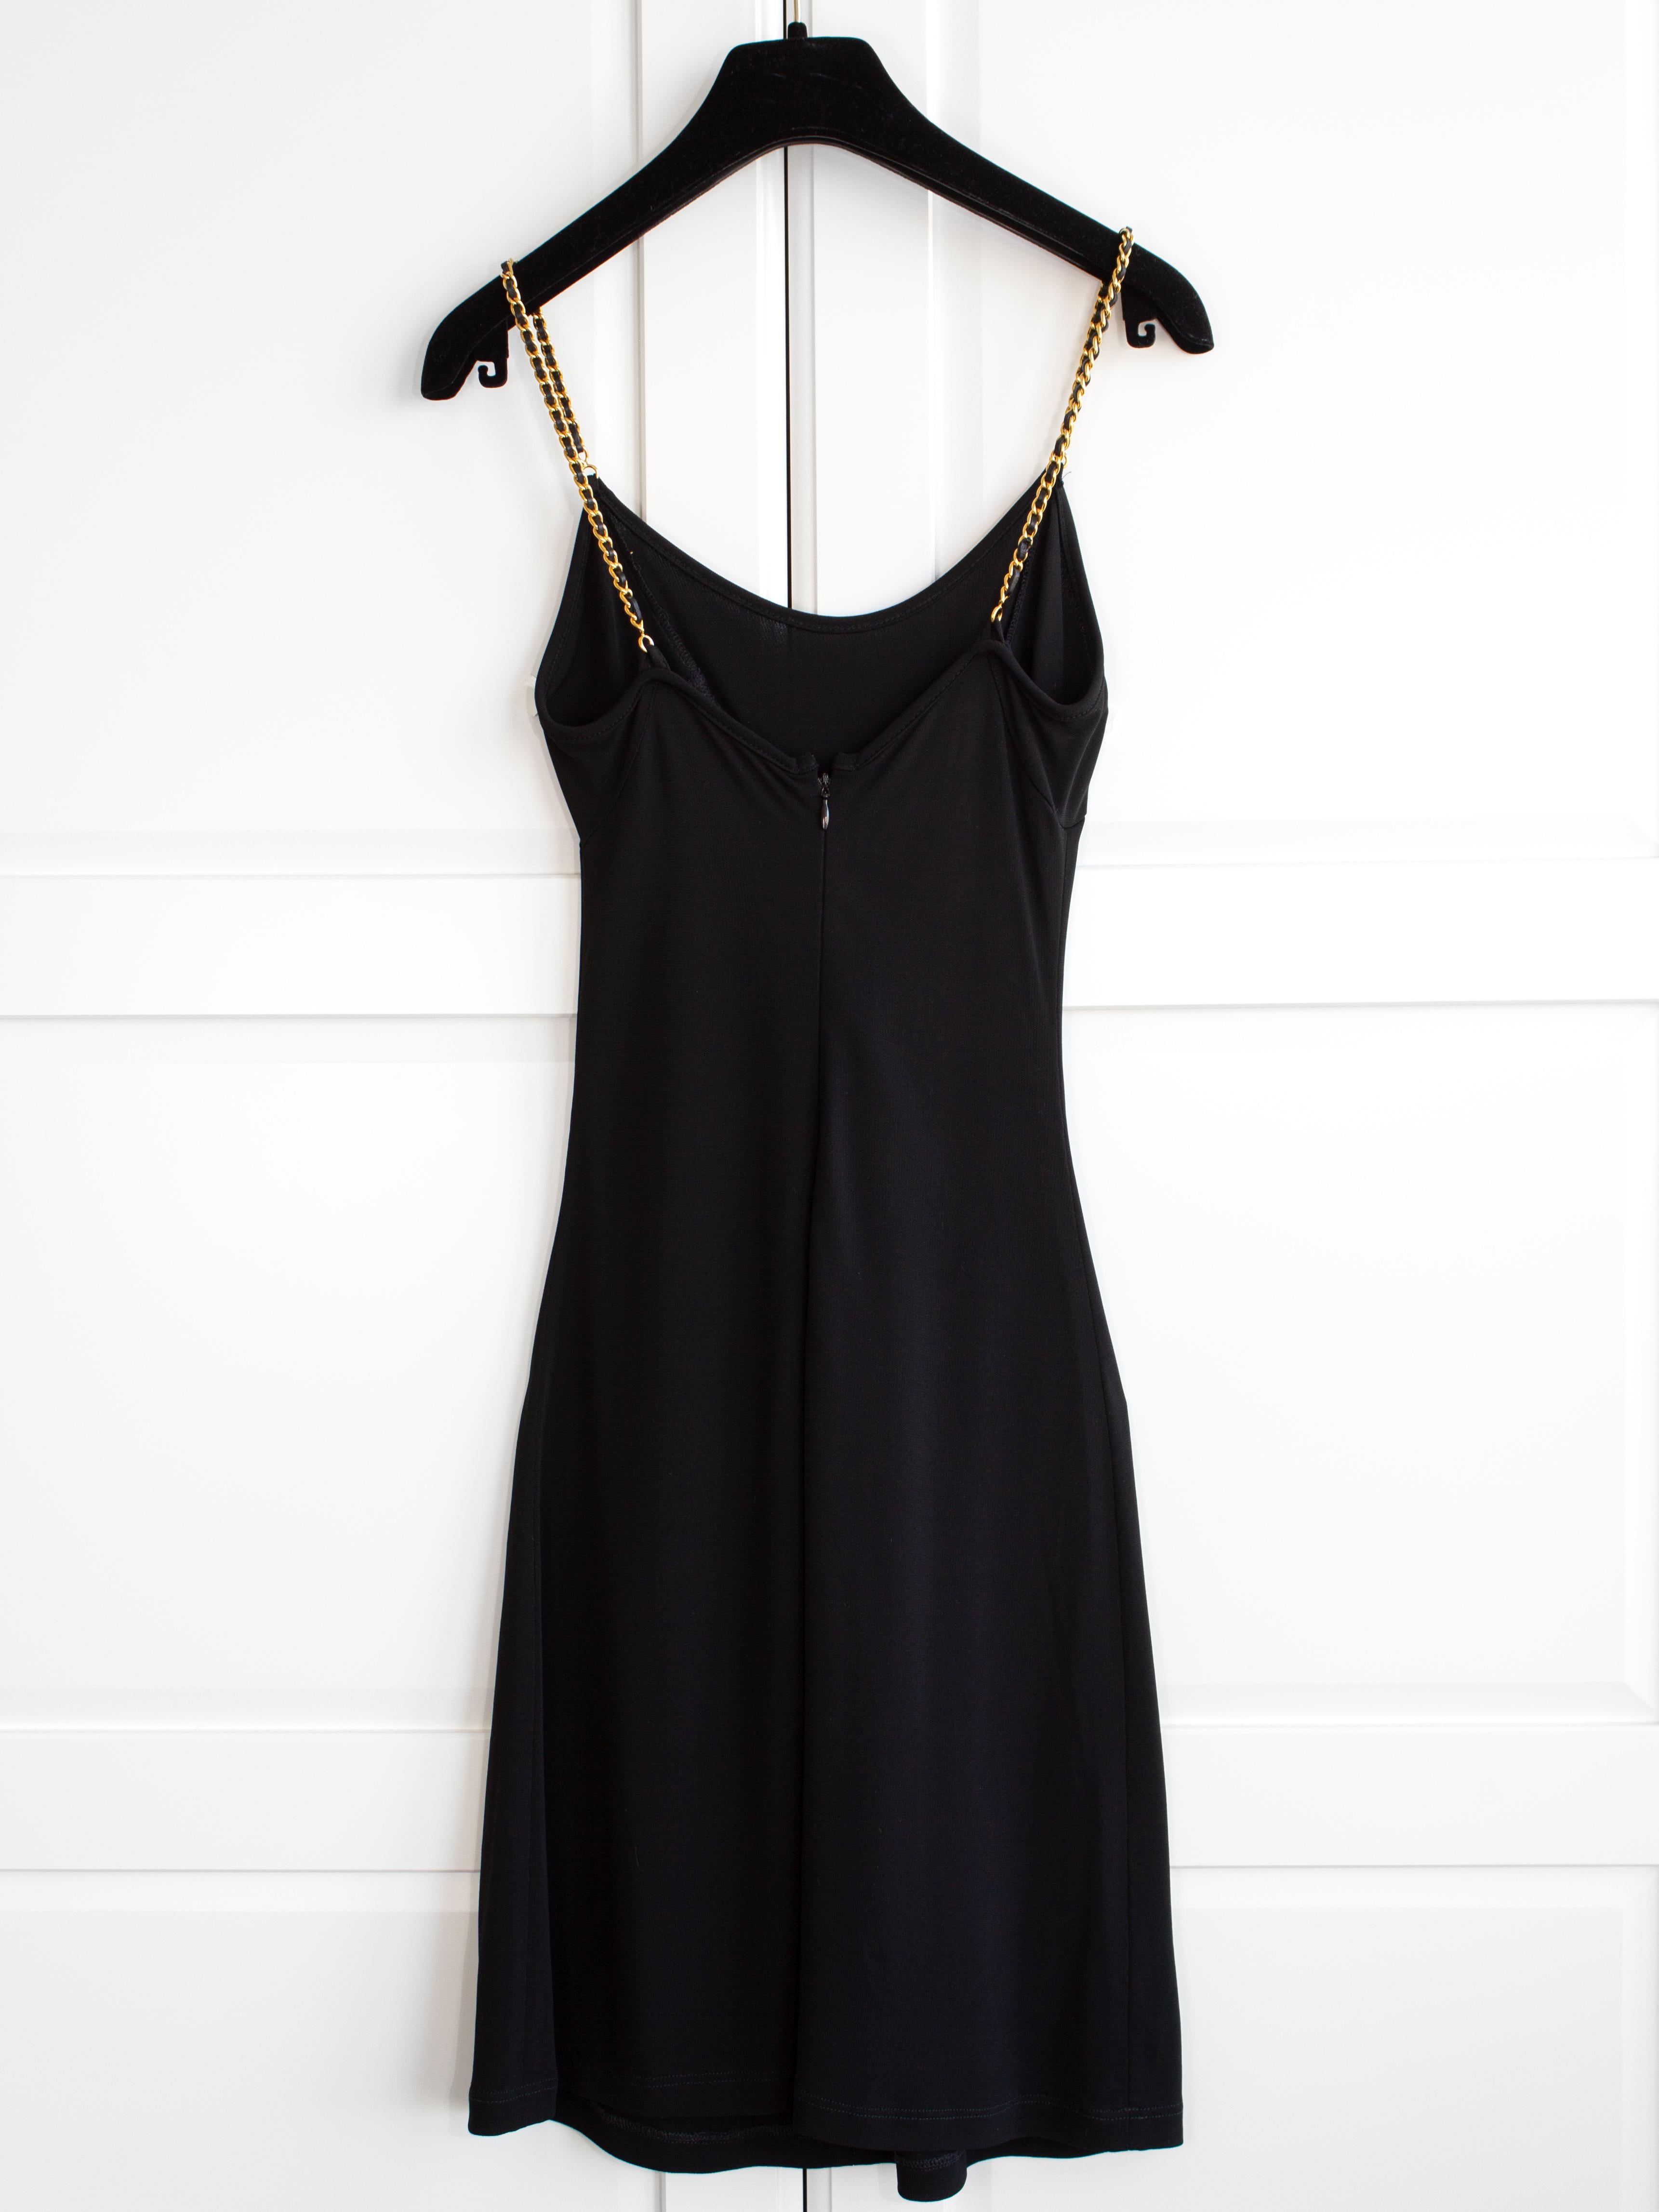 This little black dress is a cute and versatile piece from Chanel's Spring/Summer 1997 collection. It is made of black viscose and features delicate gold leather chain straps, adding just the right amount of edge. The skater style makes it suitable